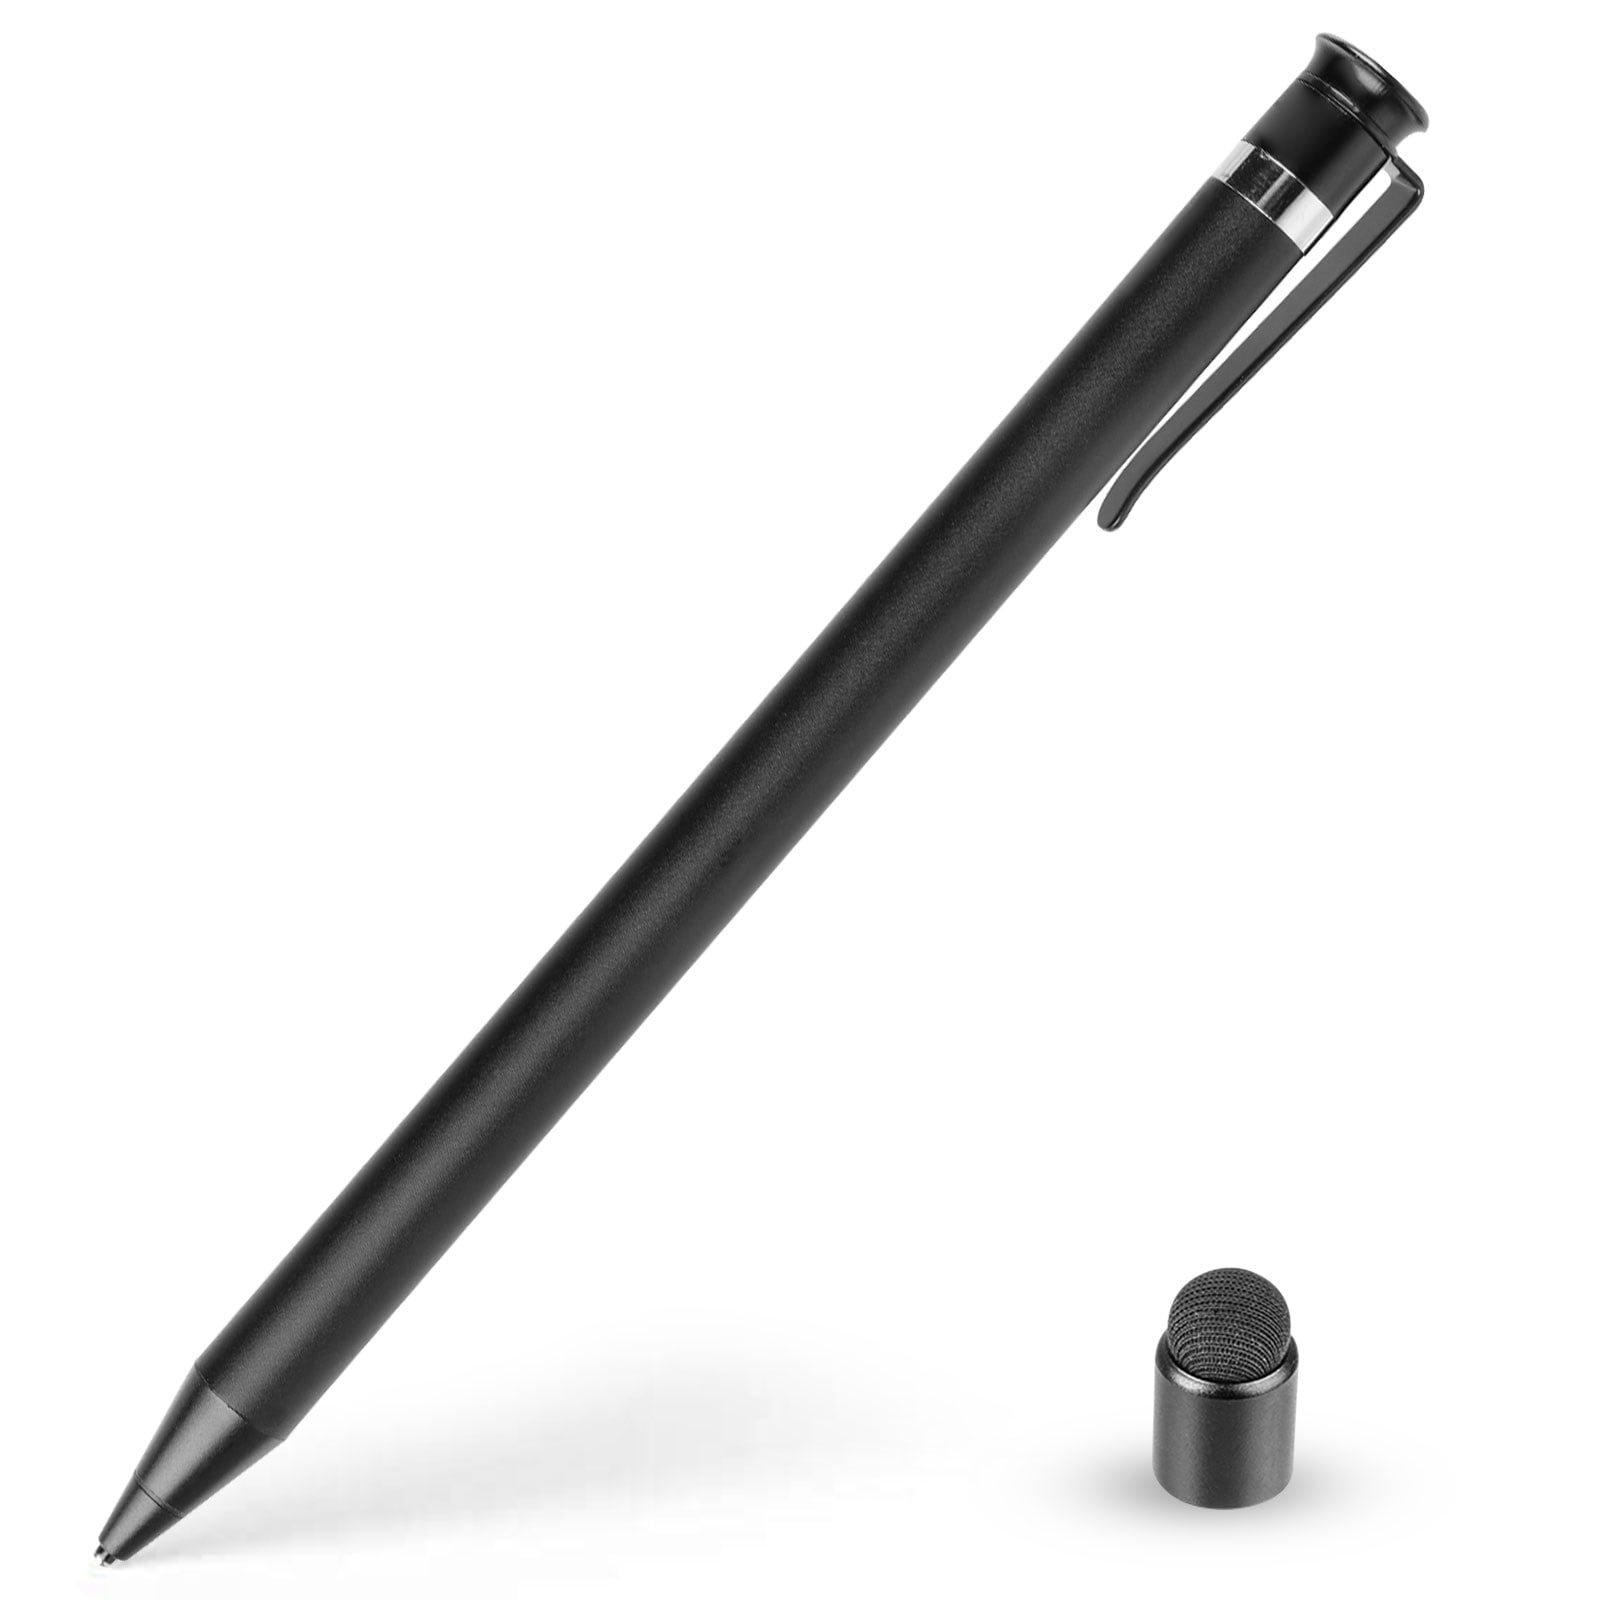 Active Stylus Pen Fine Tip Active Capacitive Stylus for Touch Screen 1.9mm Ultra Fine Tip Compatibility iPhone/iPad/Android and Touchscreen Devices Rechargeable Digital Pen